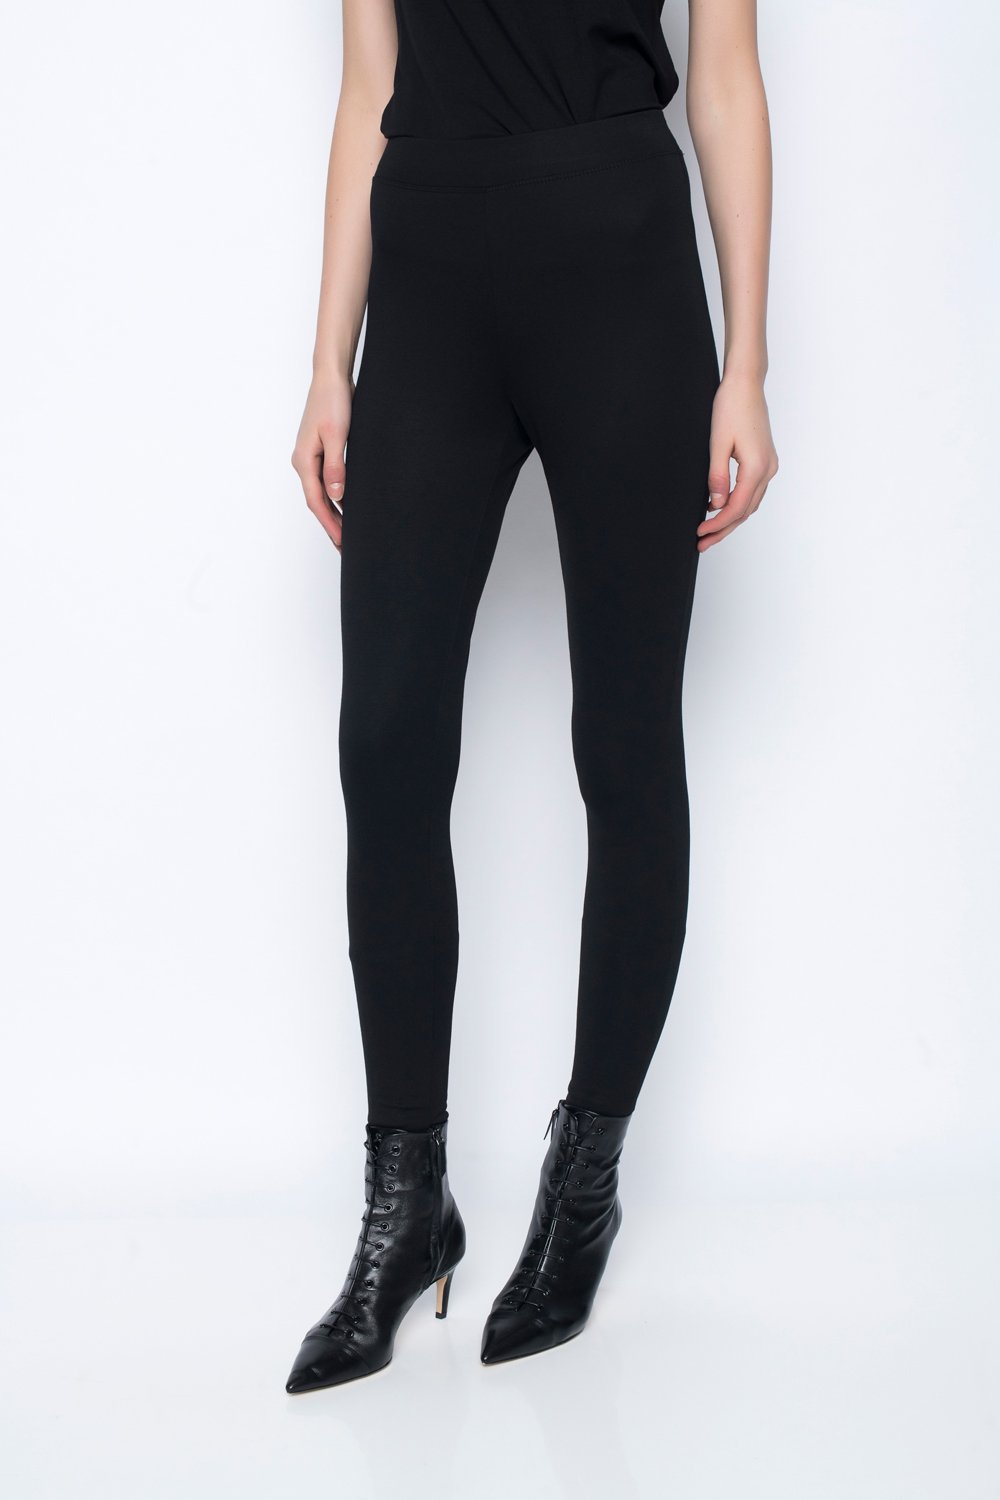 Express high waisted thick grommet lace-up leggings - ShopStyle